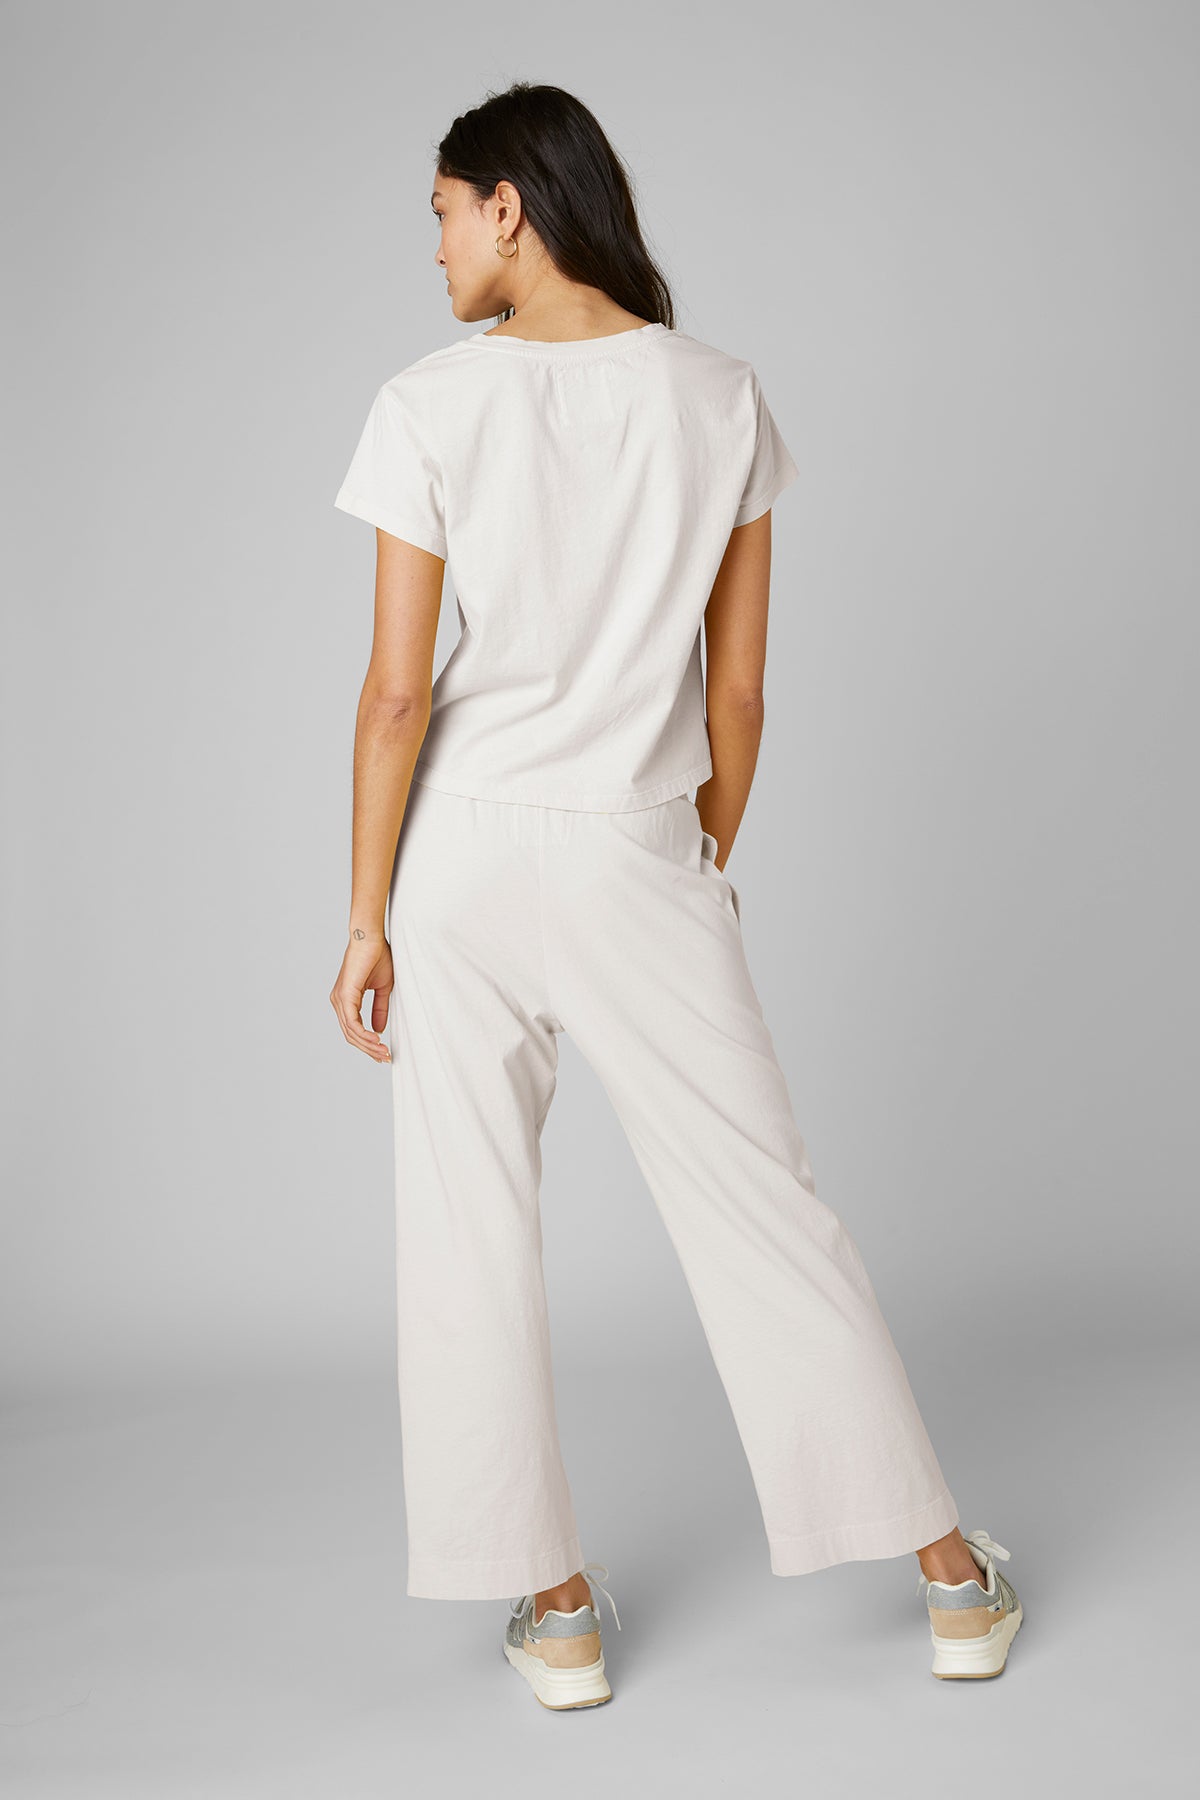 venice tee beach back with pismo pant-24344326930625